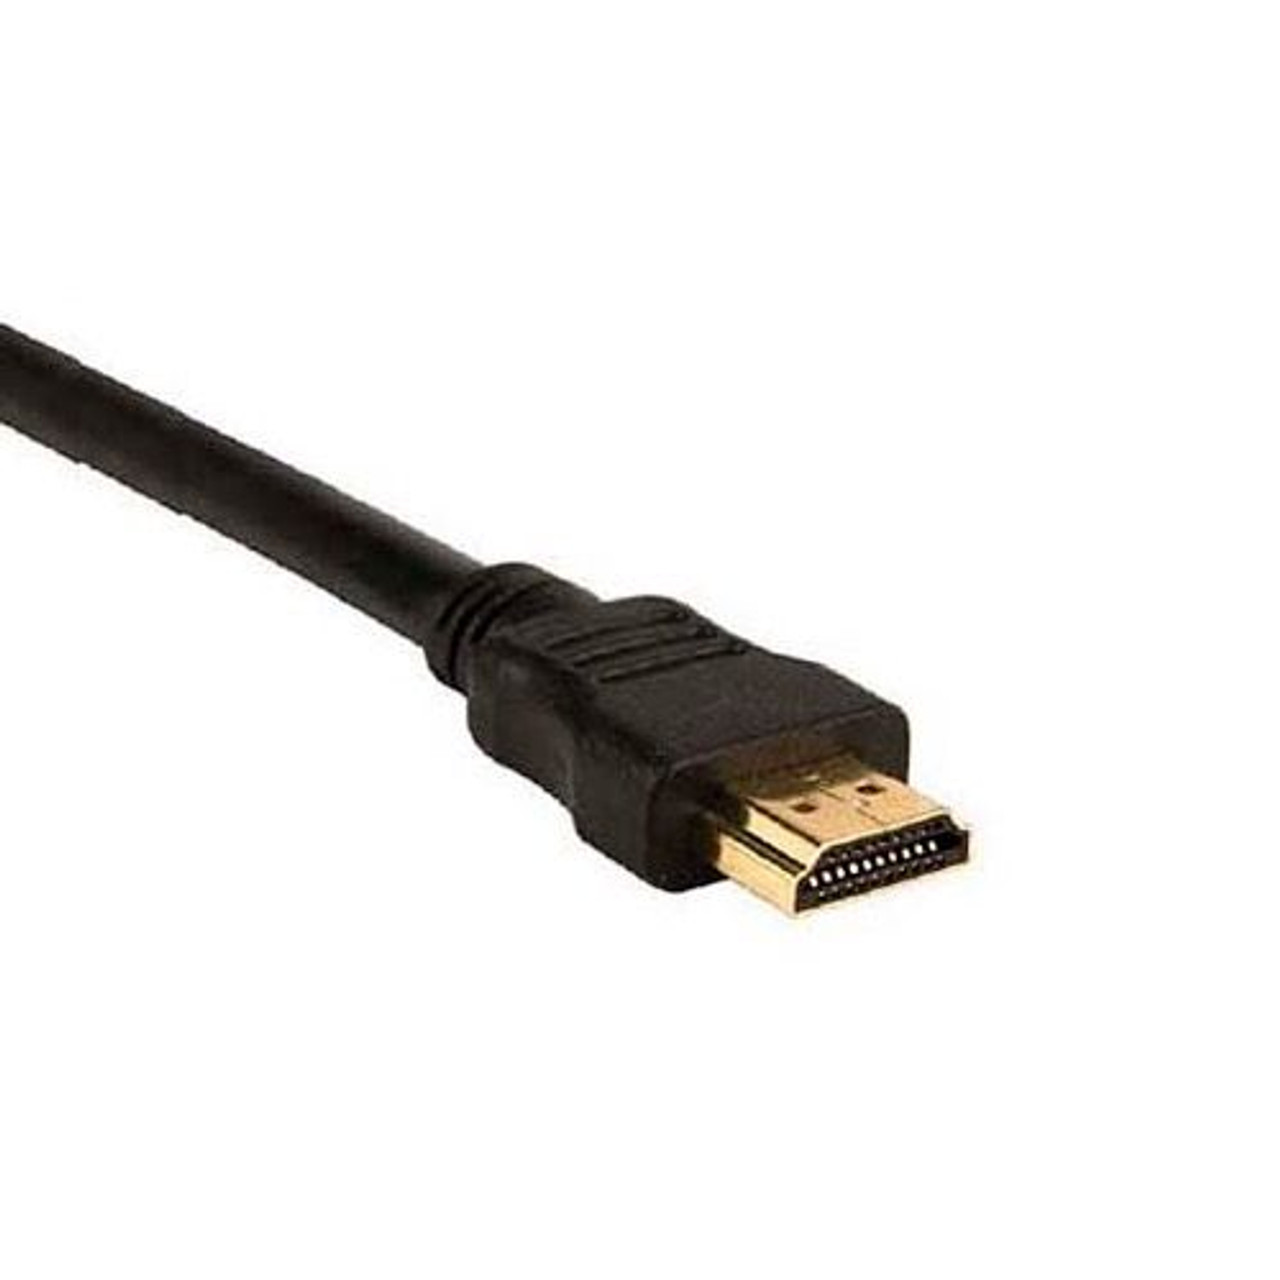 Steren 526-203BK 3' FT HDMI Male to HDMI Male Cable 1080p 1.3-B Certified Video Digital HDTV Gold Plate 28 AWG Pure Copper 1.3B Approved Premium High Definition Multi-Media Interface Interconnect, Part # 526203-BK